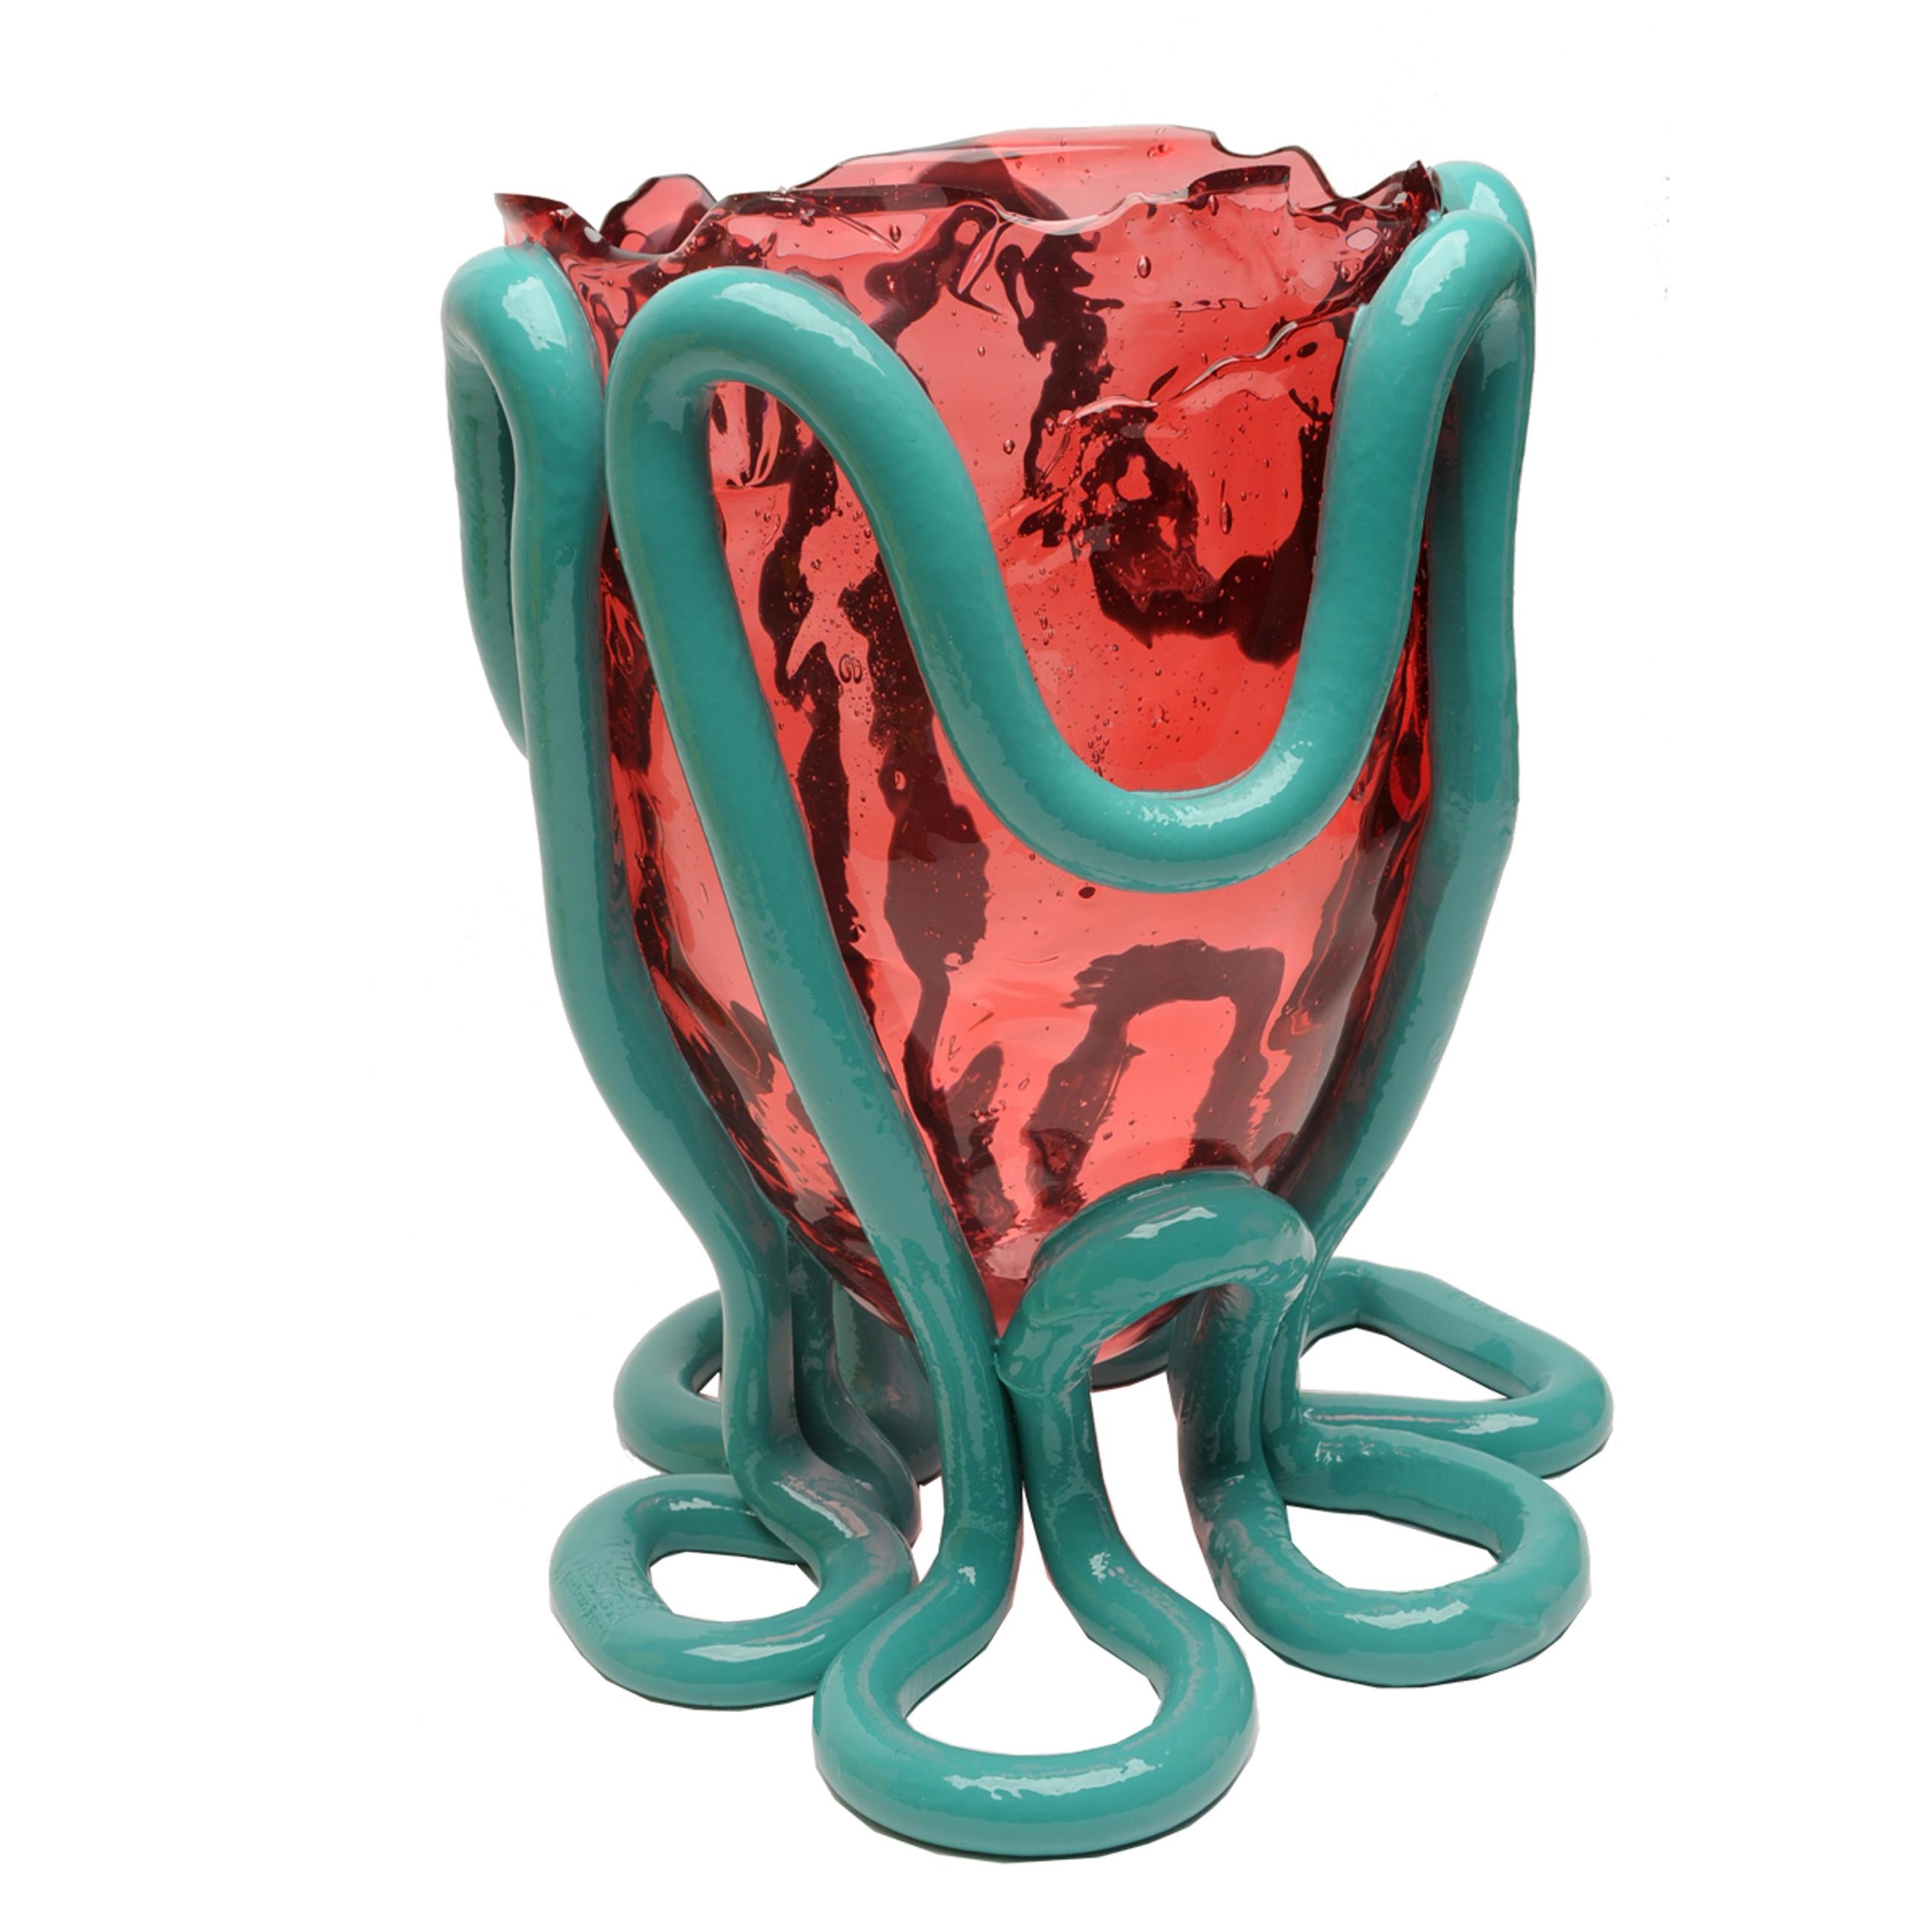 Indian Summer vase, clear light fuchsia and matt ocean blue.

Vase in soft resin designed by Gaetano Pesce in 1995 for Fish Design collection.
Measures: L - ø 22cm x H 36cm.
Colours: clear light fuchsia and matt ocean blue

Other sizes